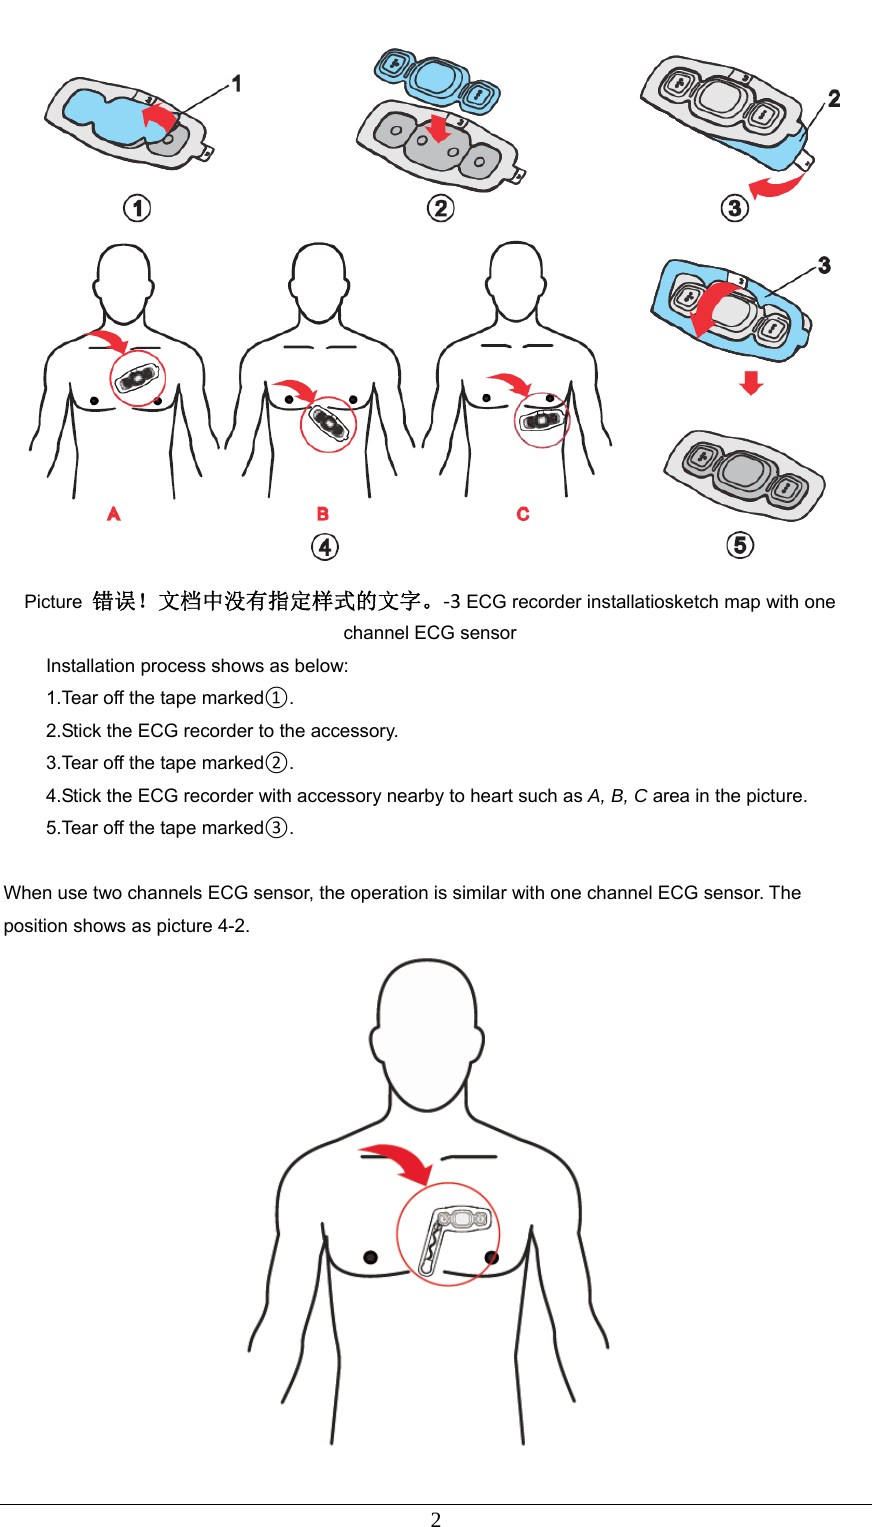  2  Picture  错误！文档中没有指定样式的文字。‐3ECG recorder installatiosketch map with one channel ECG sensor Installation process shows as below: 1.Tear off the tape marked①. 2.Stick the ECG recorder to the accessory. 3.Tear off the tape marked②. 4.Stick the ECG recorder with accessory nearby to heart such as A, B, C area in the picture. 5.Tear off the tape marked③.  When use two channels ECG sensor, the operation is similar with one channel ECG sensor. The position shows as picture 4-2. 